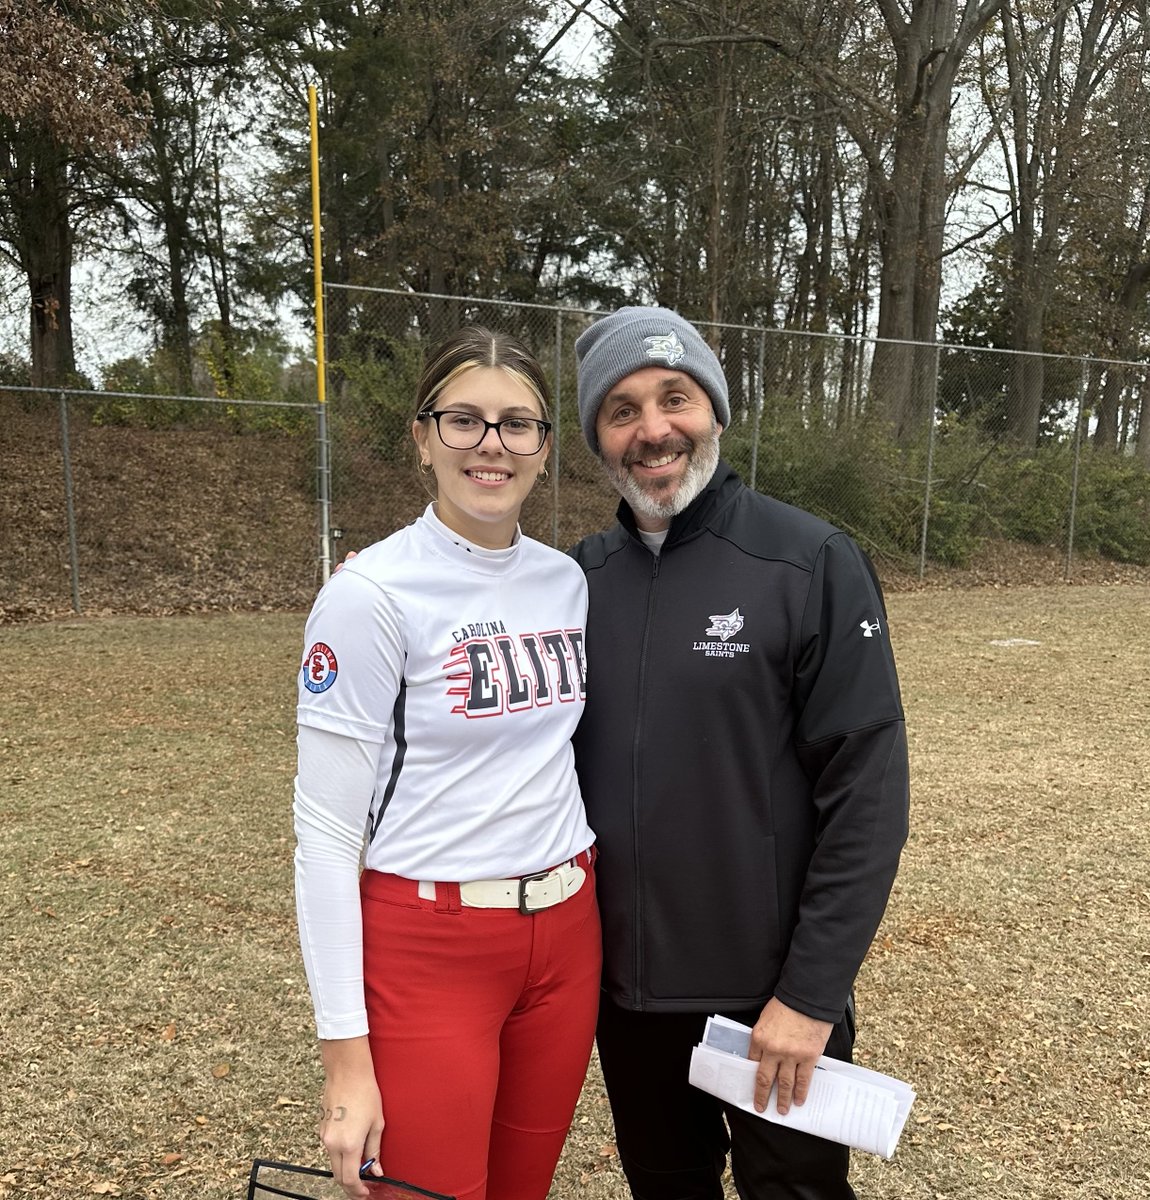 Had a fun day learning from @CoachRPauly in the pitching camp at @UpstateSoftball today. Thank you to @sarahpauly23 and all of the coaches for the positive feedback and helpful tips. @PACKUPSTATE @LimestoneSball @CoachJDeitz @ErskineSoftball @uscaikensb @tbullard71